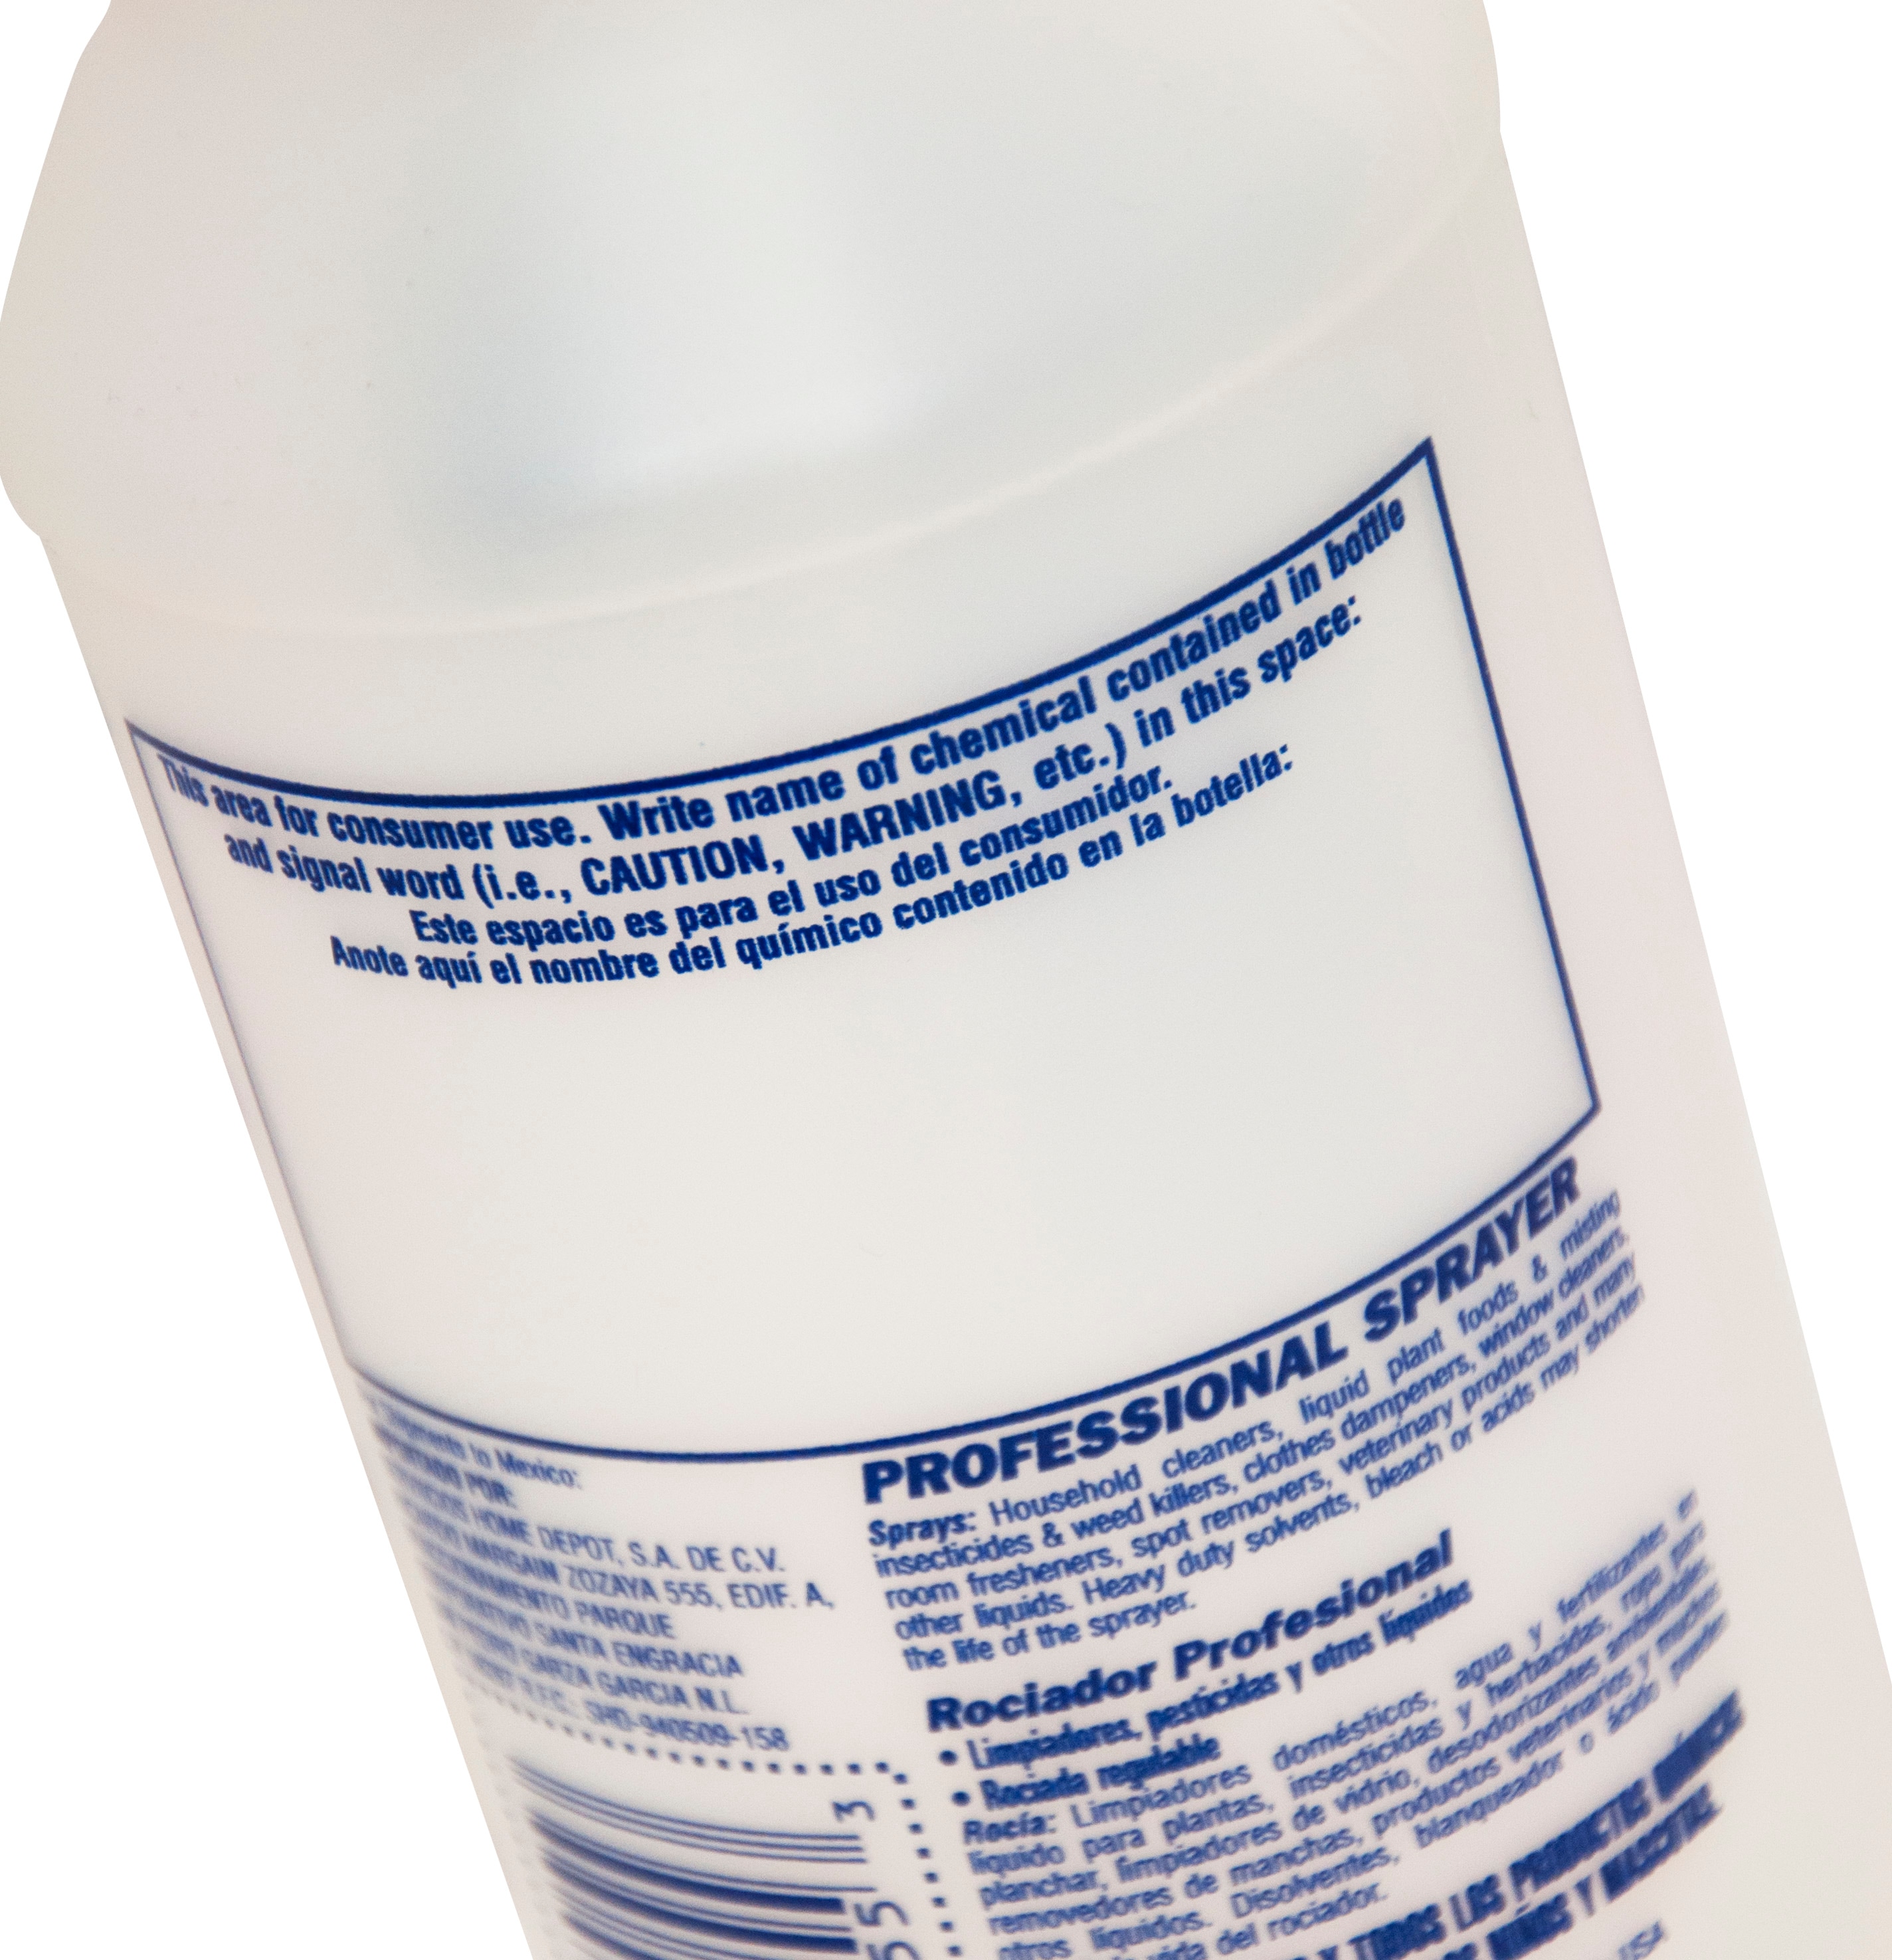 HCL Labels 32 oz Pre-labeled GHS Spray Bottle Zep All-Purpose Cleaner